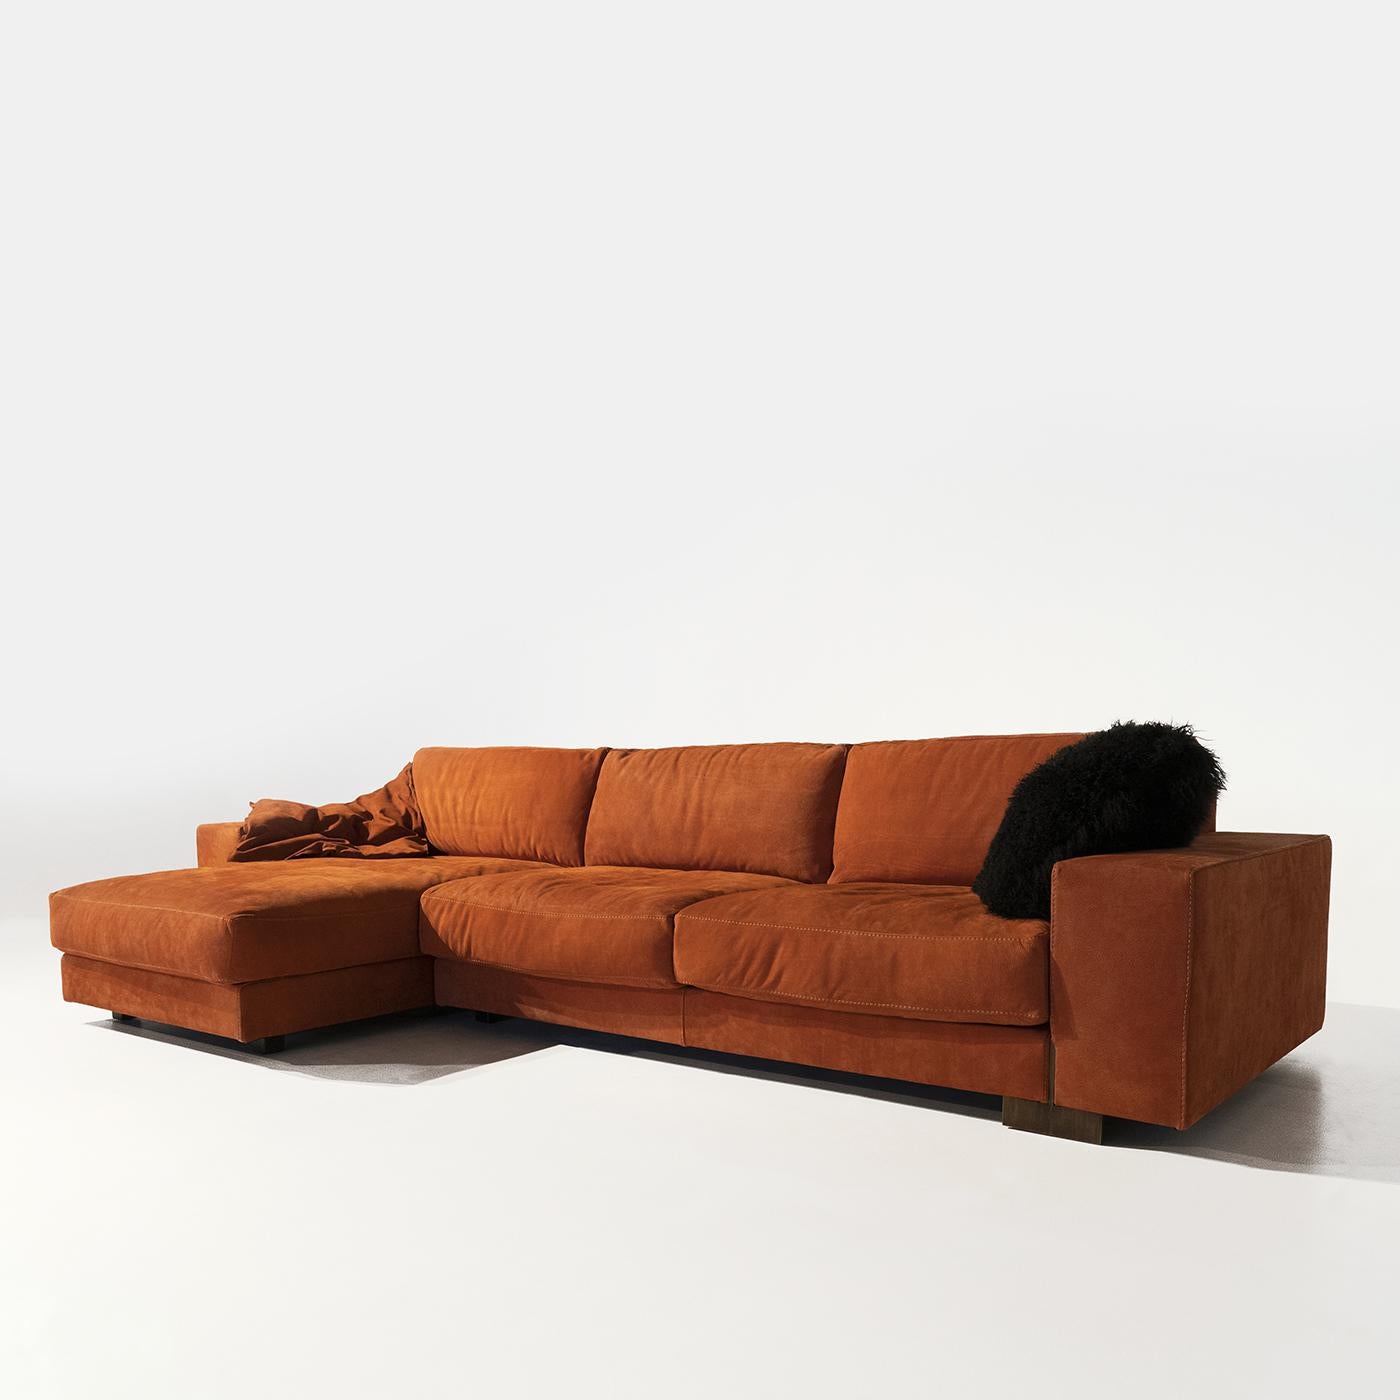 The Glam sofa represents the quintessence of the modern modular sofa, creating a warm feel in the living room with its deep red fabric upholstery. Pairing a geometric body with soft double-density polyurethane cushions and goose down seats, this